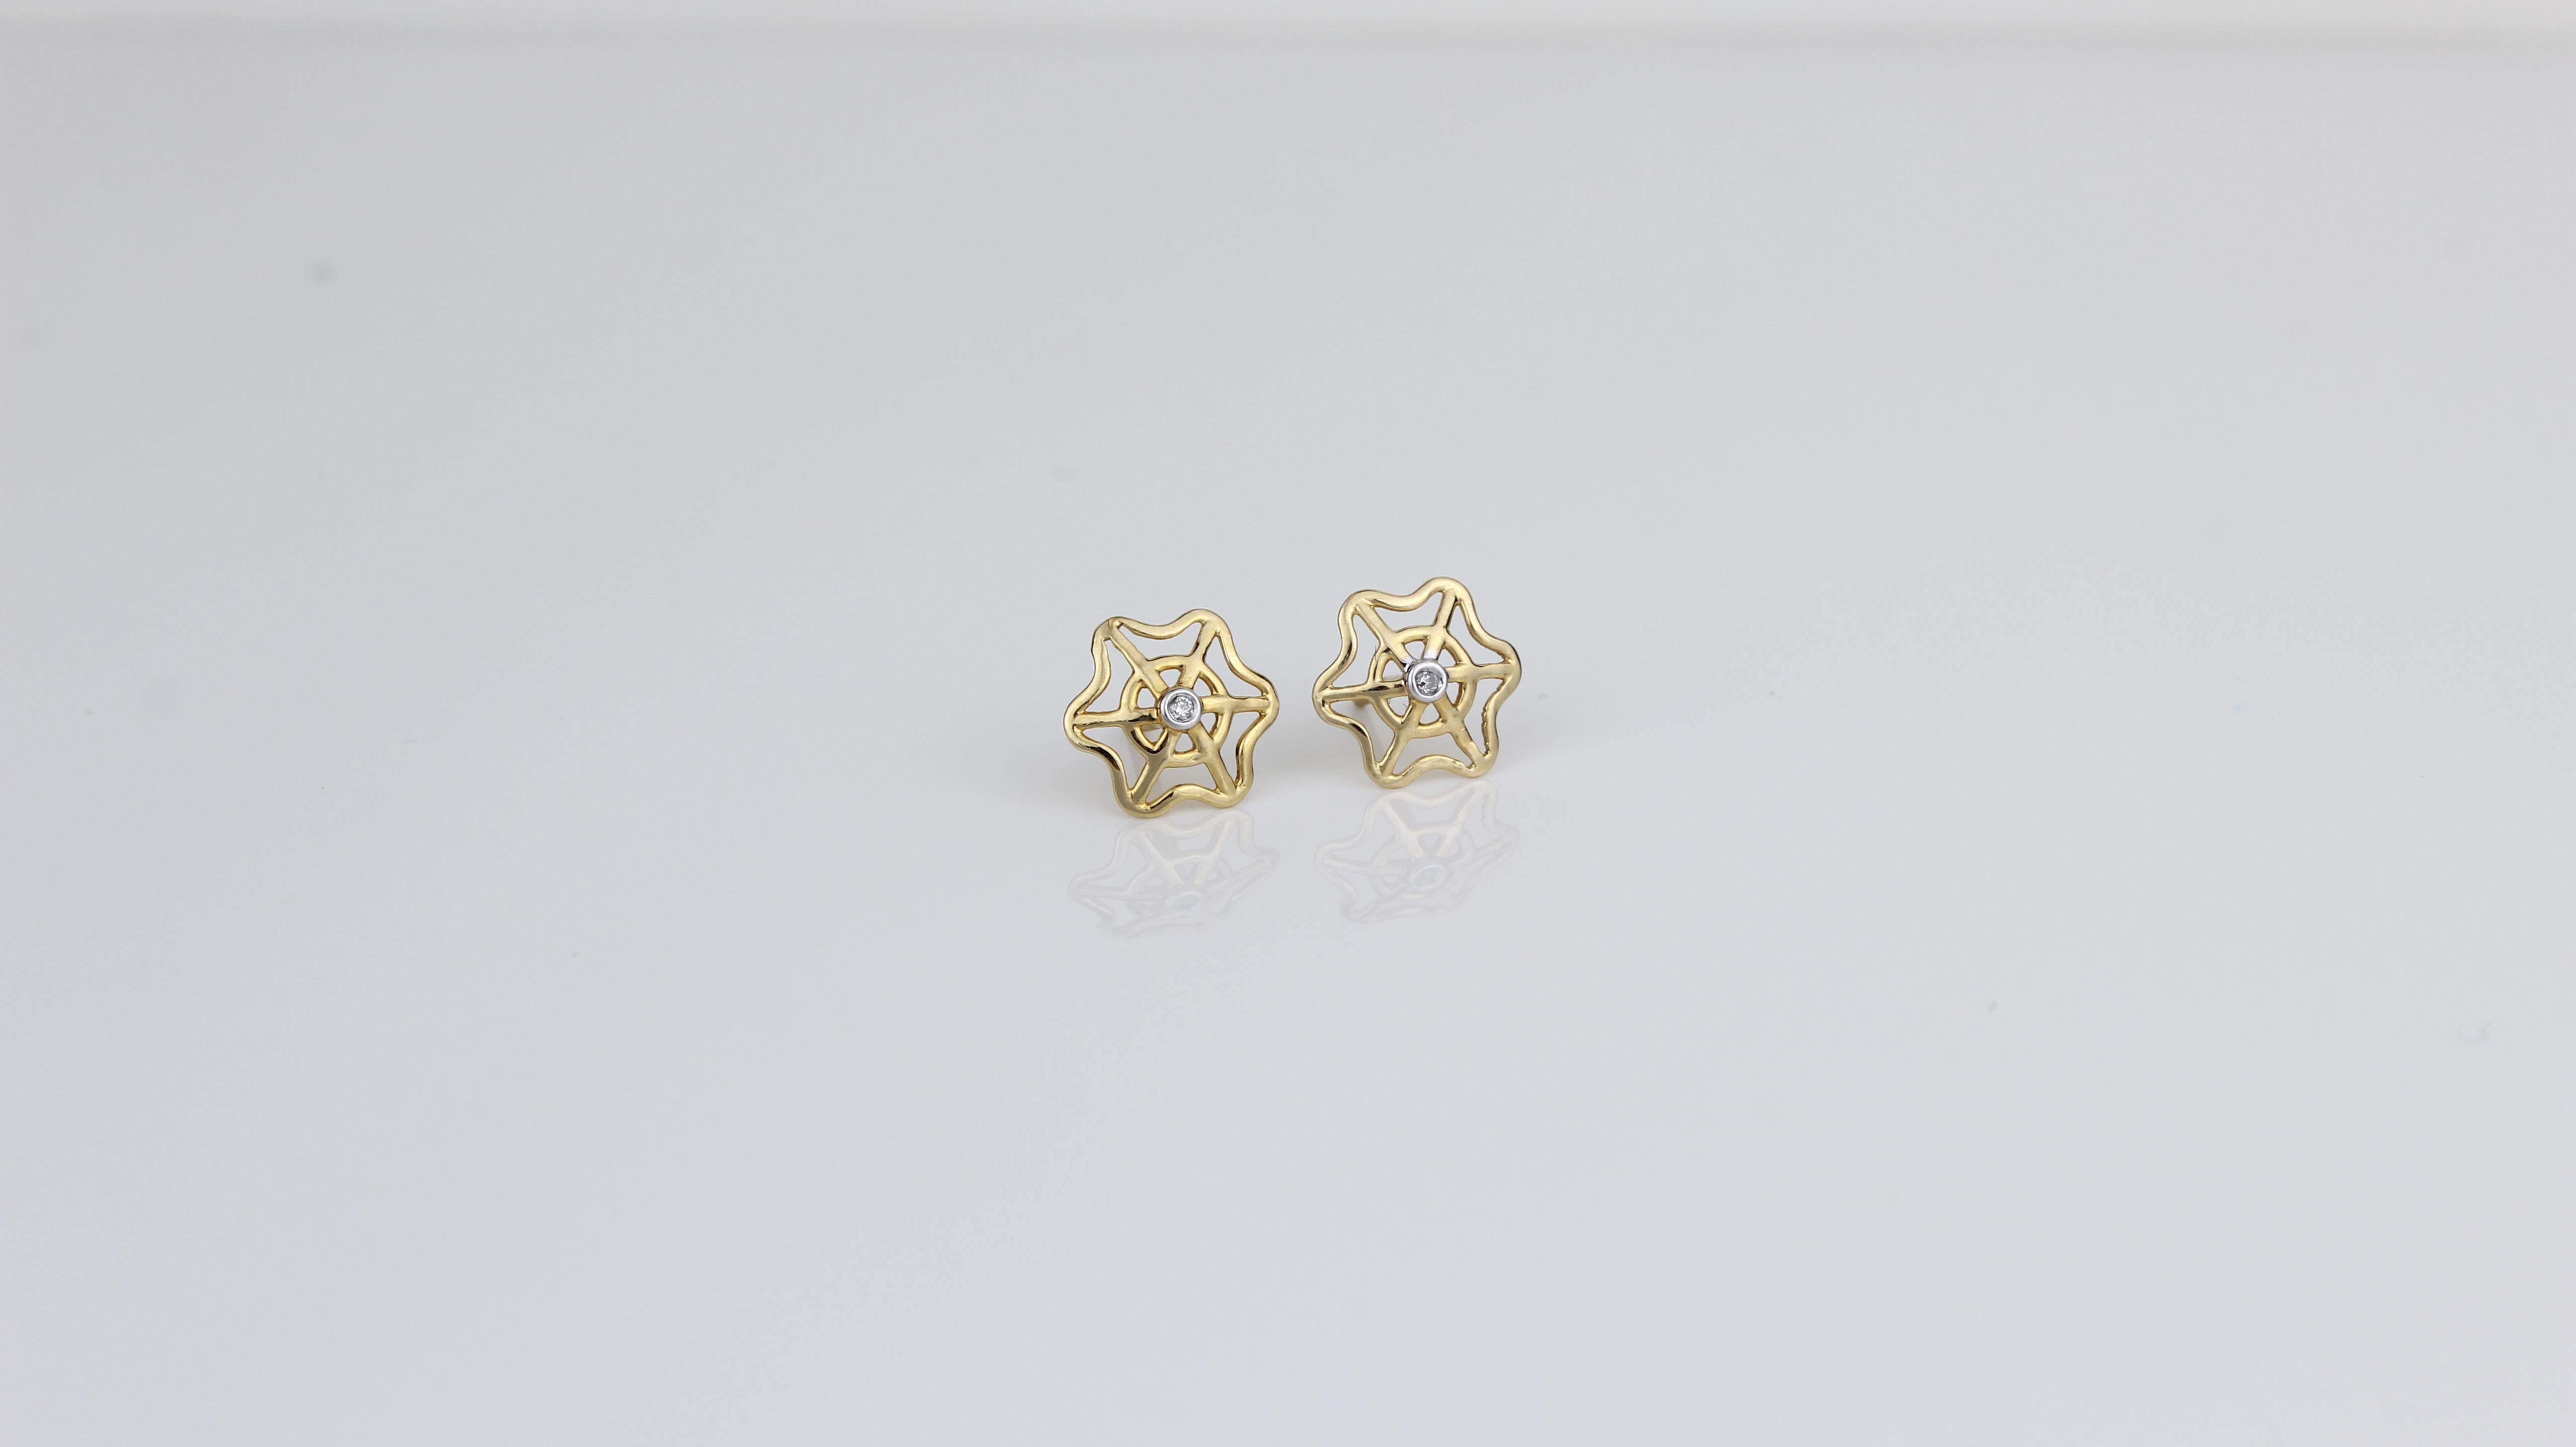 Spider Web Diamond Earrings for Girls (Kids/Toddlers) in 18K Solid Gold are uniquely captivating and intricately designed jewelry pieces for young children. These earrings feature a whimsical spider web design meticulously crafted from high-quality